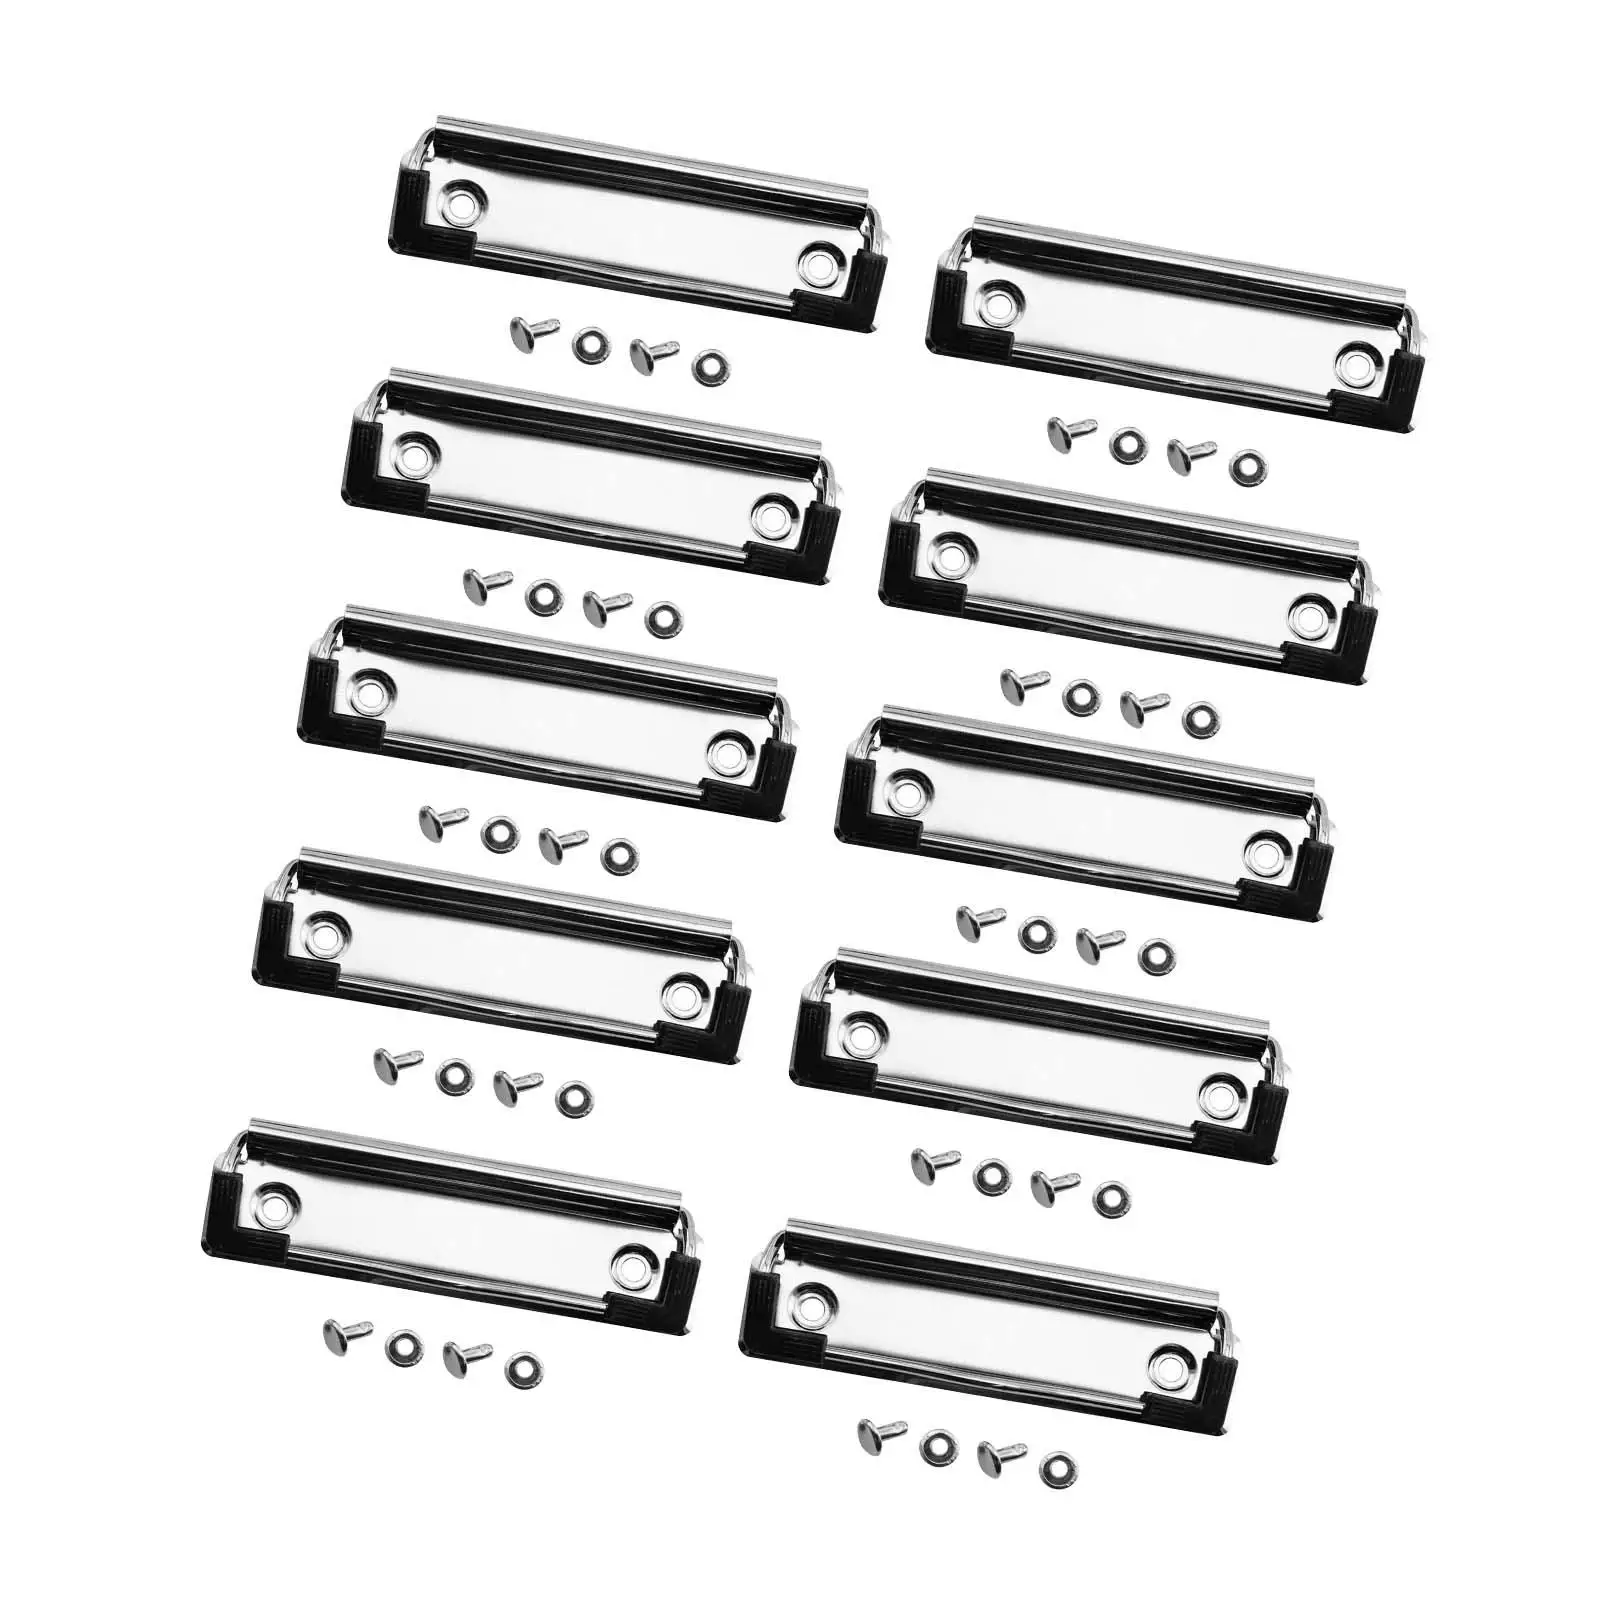 10Pcs Clips for Clipboard Hardware Stationery Plate Holder for Stationery Supplies Business Office